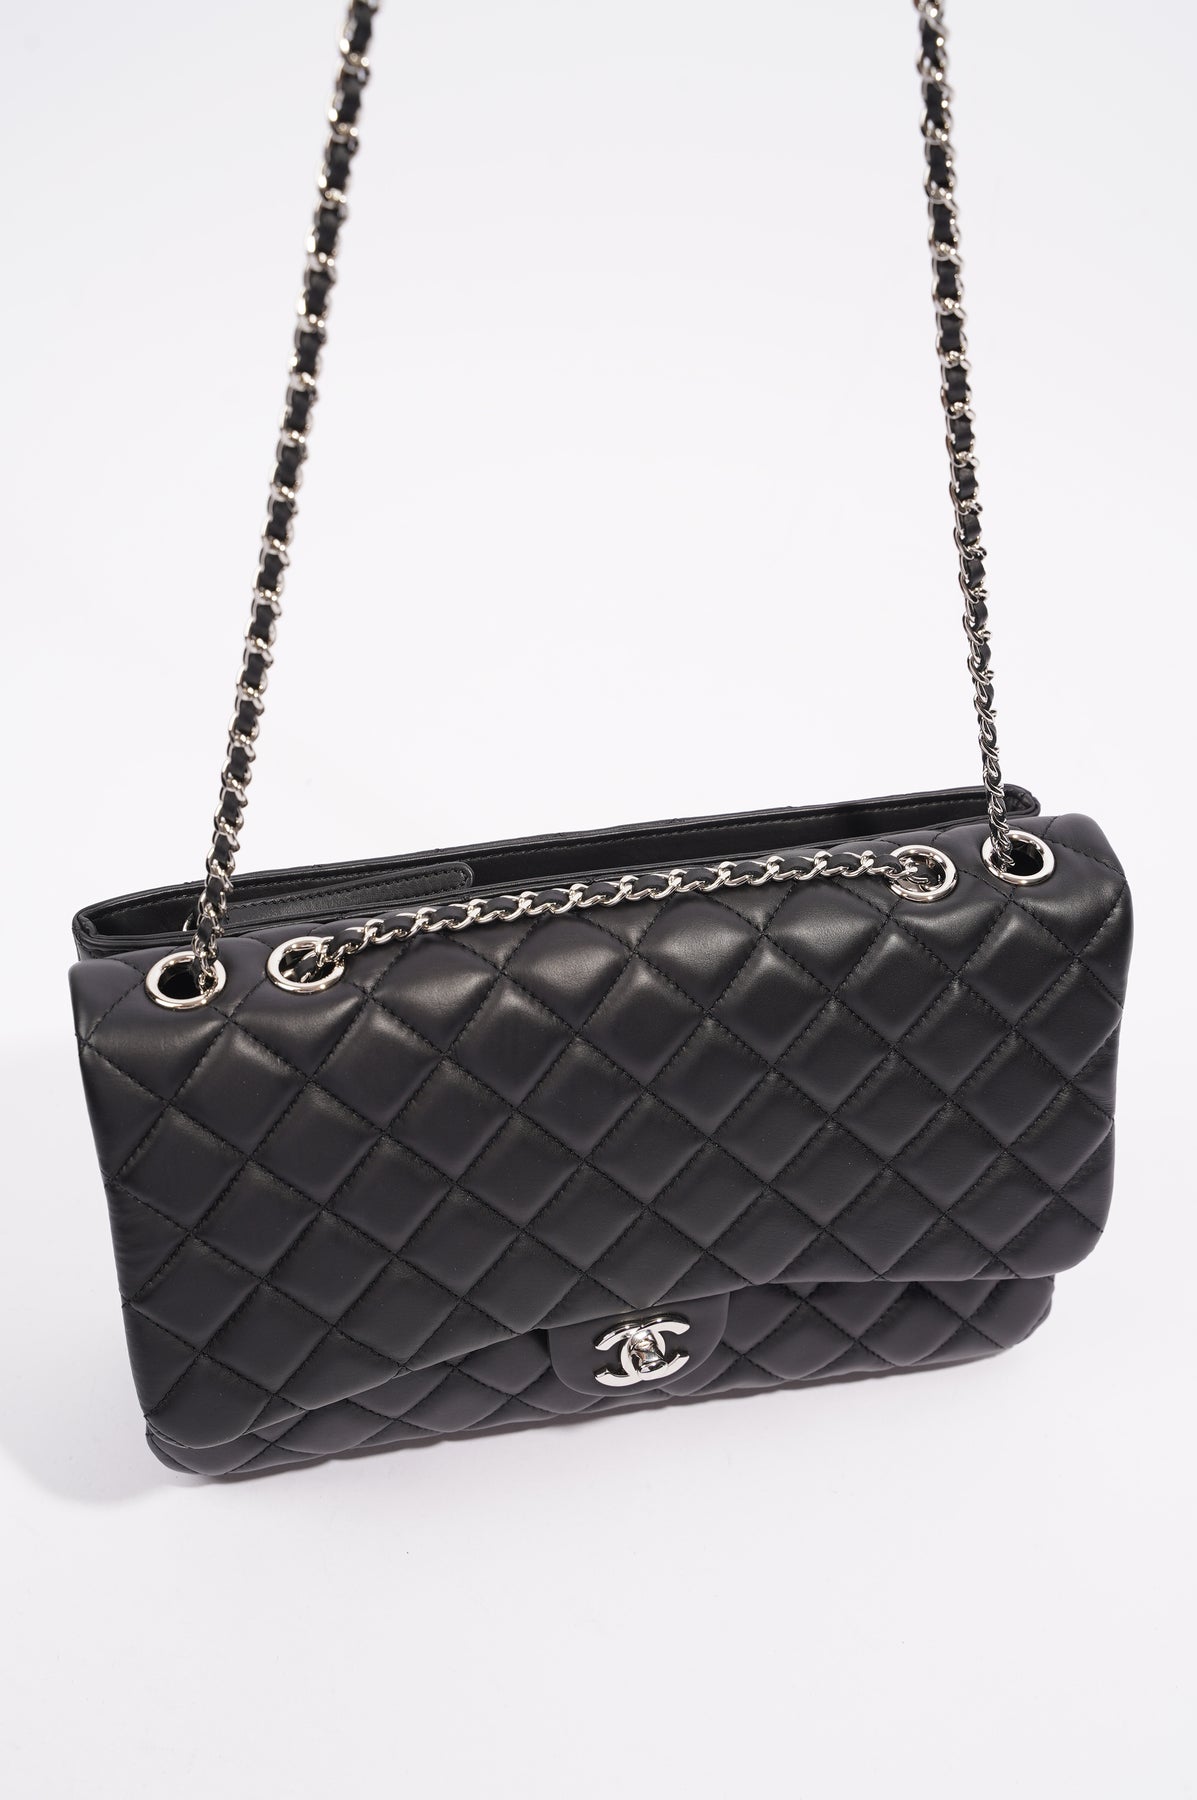 Chanel Quilted Lambskin Leather Tote Beige And Black with Silver